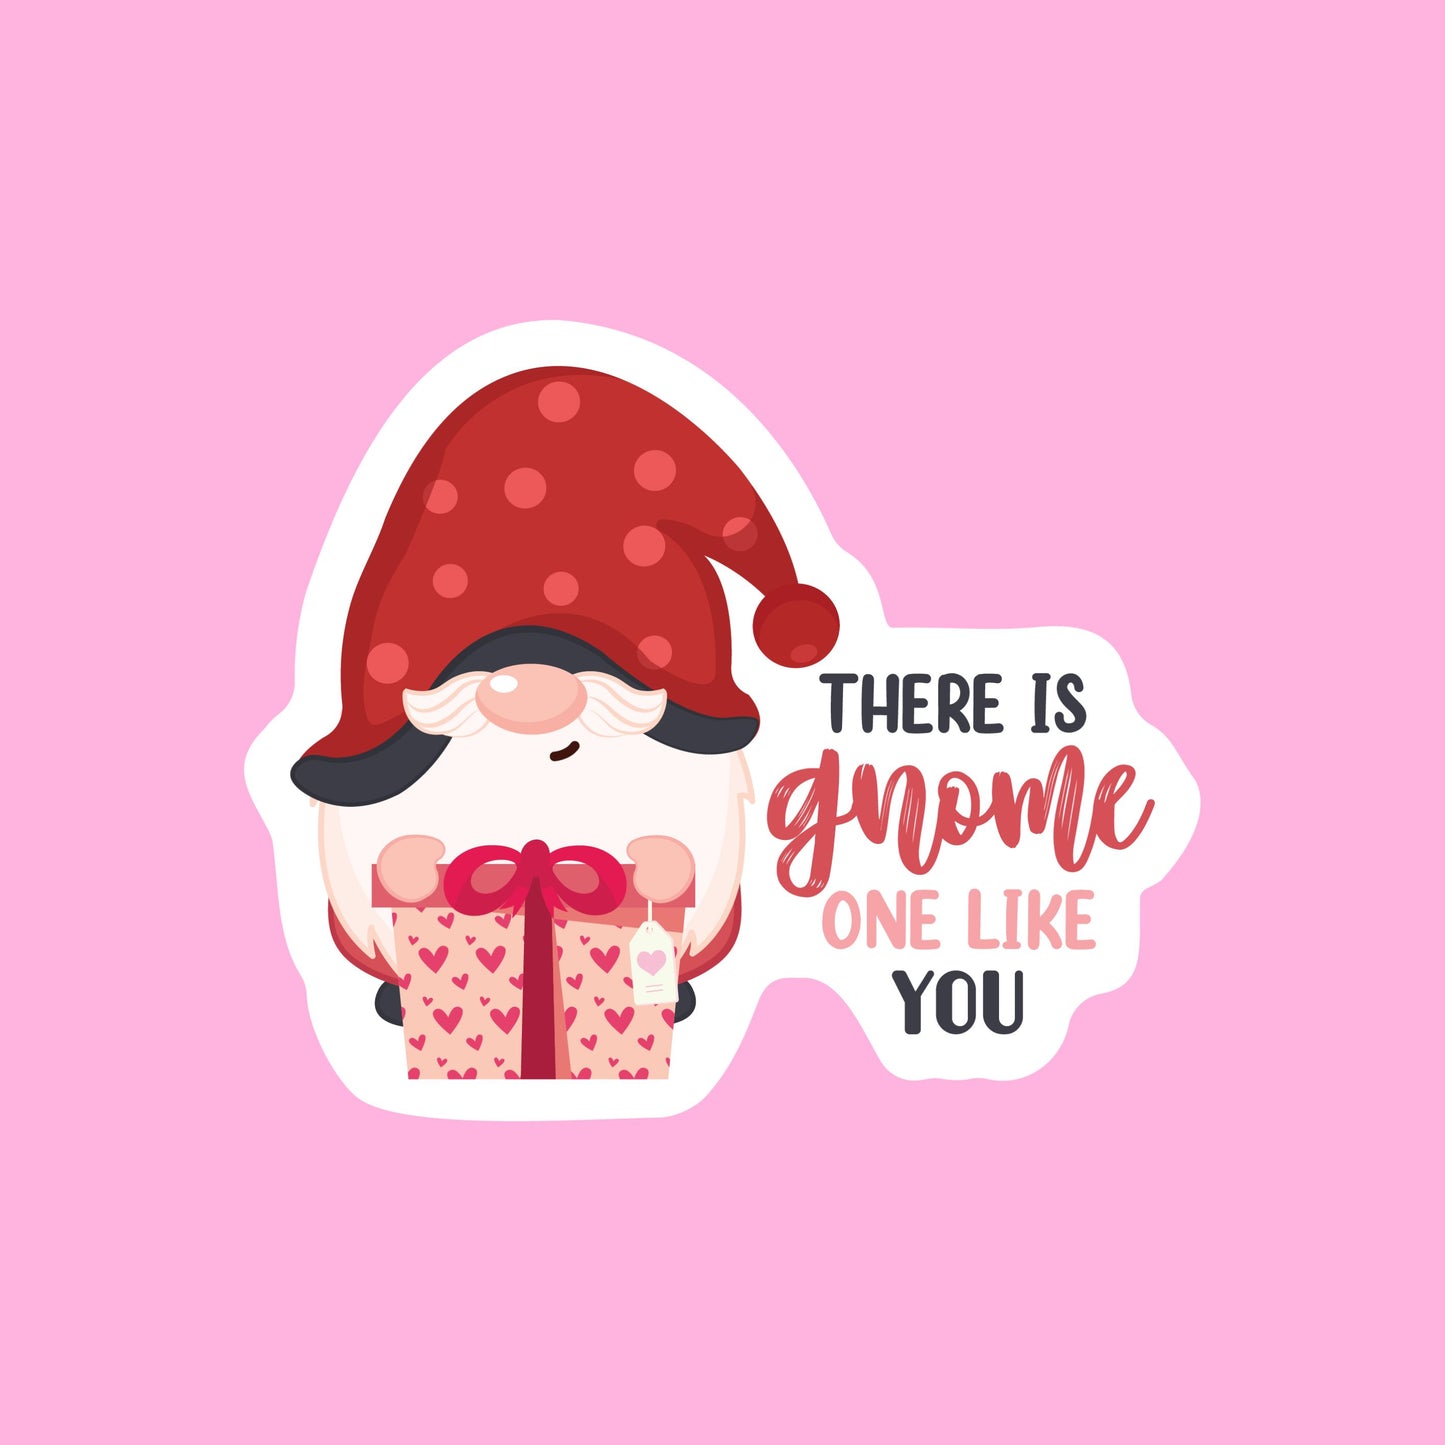 V-day STICKERS -  there is gnome one like you - Glossy Vinyl Sticker Water Bottle Sticker Laptop Sticker